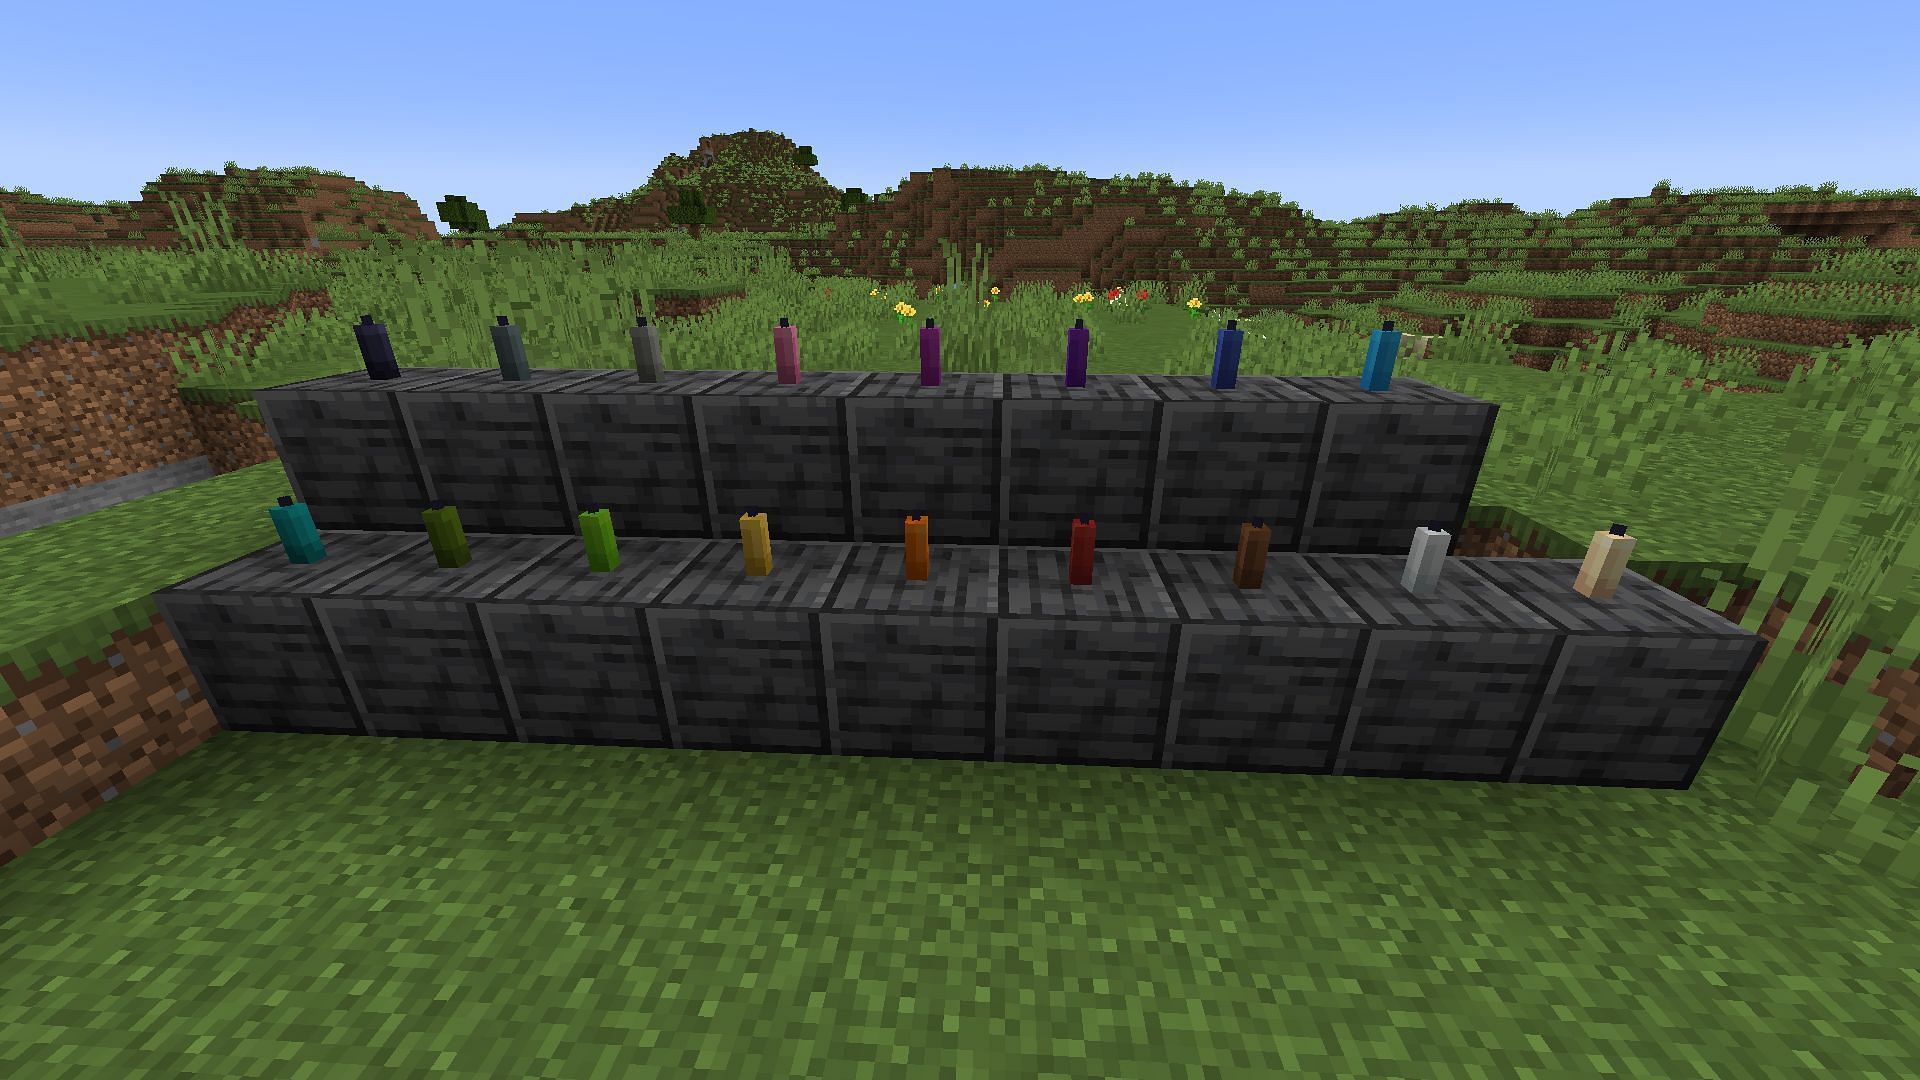 An example of the different colors of candles (Image via Minecraft)